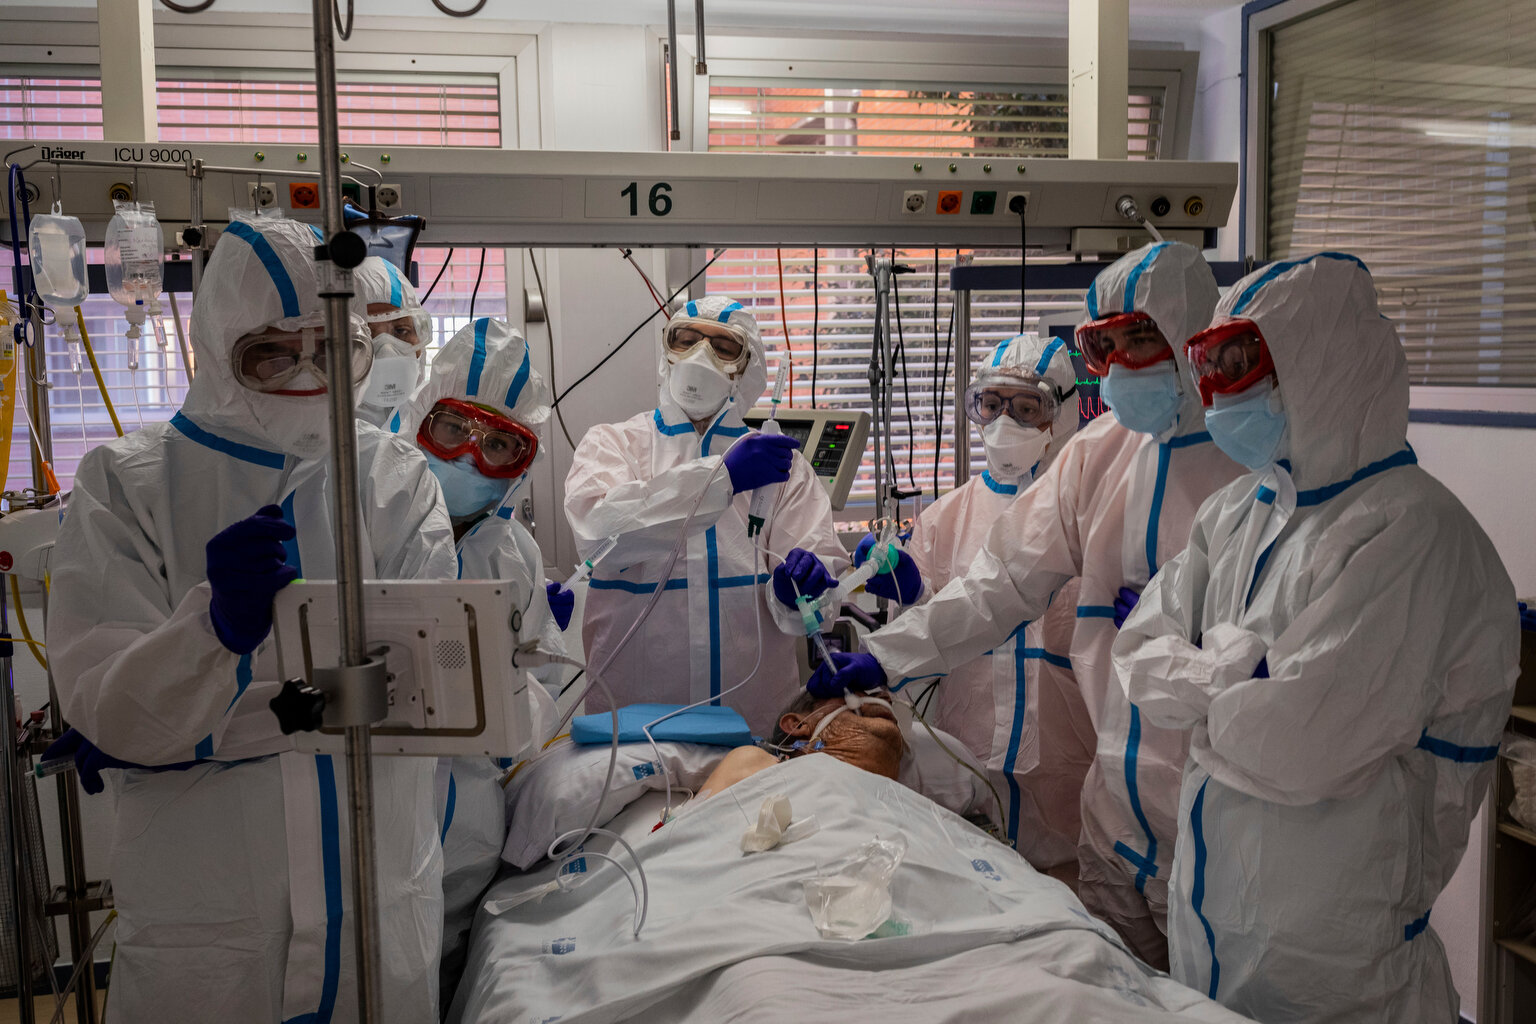  A patient infected with COVID-19 is treated in one of the intensive care units (ICU) at the Severo Ochoa hospital in Leganes, outskirts of Madrid, Spain, Friday, Oct. 9, 2020. (AP Photo/Bernat Armangue) 